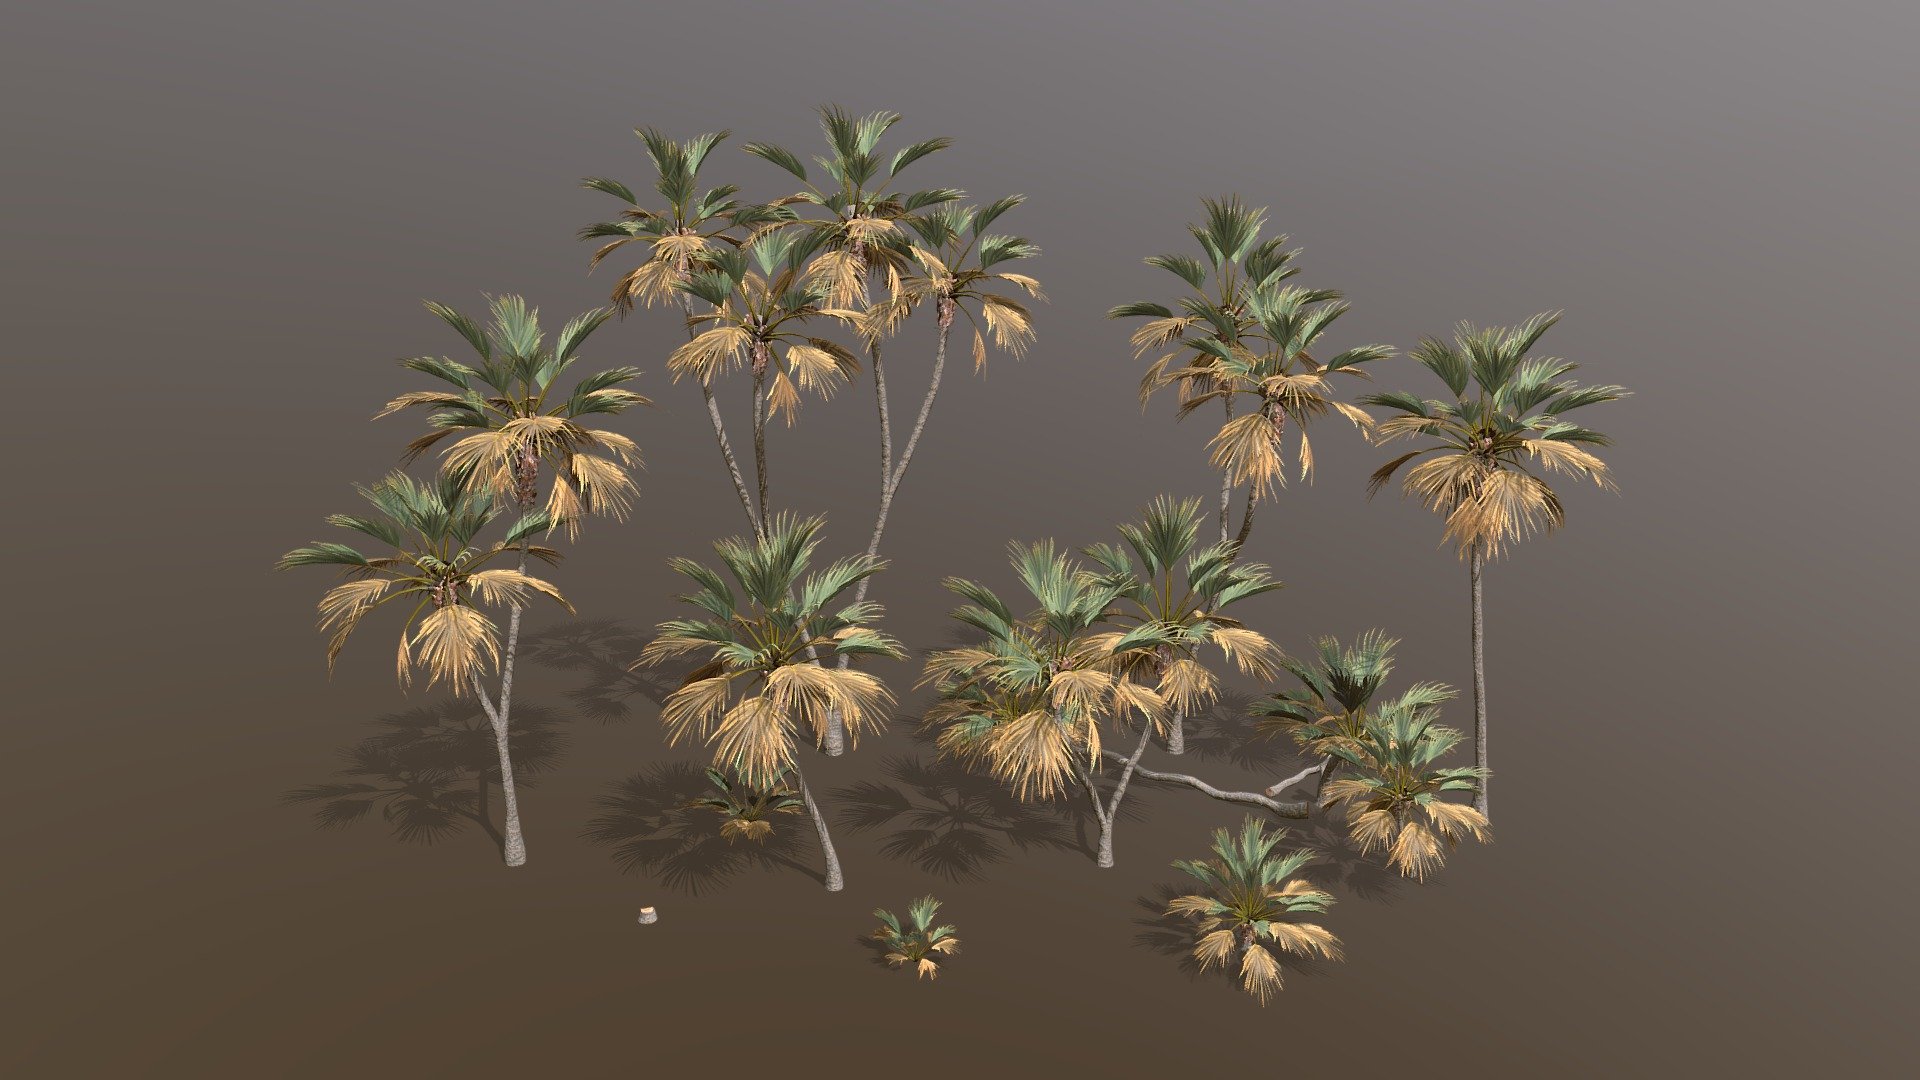 NOTE: This tree pack will soon come free with Tree It on steam.

Doum Palm pack inspired assassin’s creed origins palm models, created in tree it.

Please check out my free models on my sketchfab profile made in treeit for compatibility.

Includes 14 diffrent models.

Each modle has the main model + 5 levels of detail, last LOD is an 8 poly imposter/billboard.

Exported to .fbx .obj .dbo

fbx/dbo format includes vertex colors for vertex shader wind animation.

Includes the tree it .tre project.

Texture size is 2k x 2 + 1k bark.

Why am I selling this model?. Im the createor of treeit, a free tree generator that these tree models are created in. Having tree packs for sale will incentivise and insure further development of the program that is in need of improvement 3d model